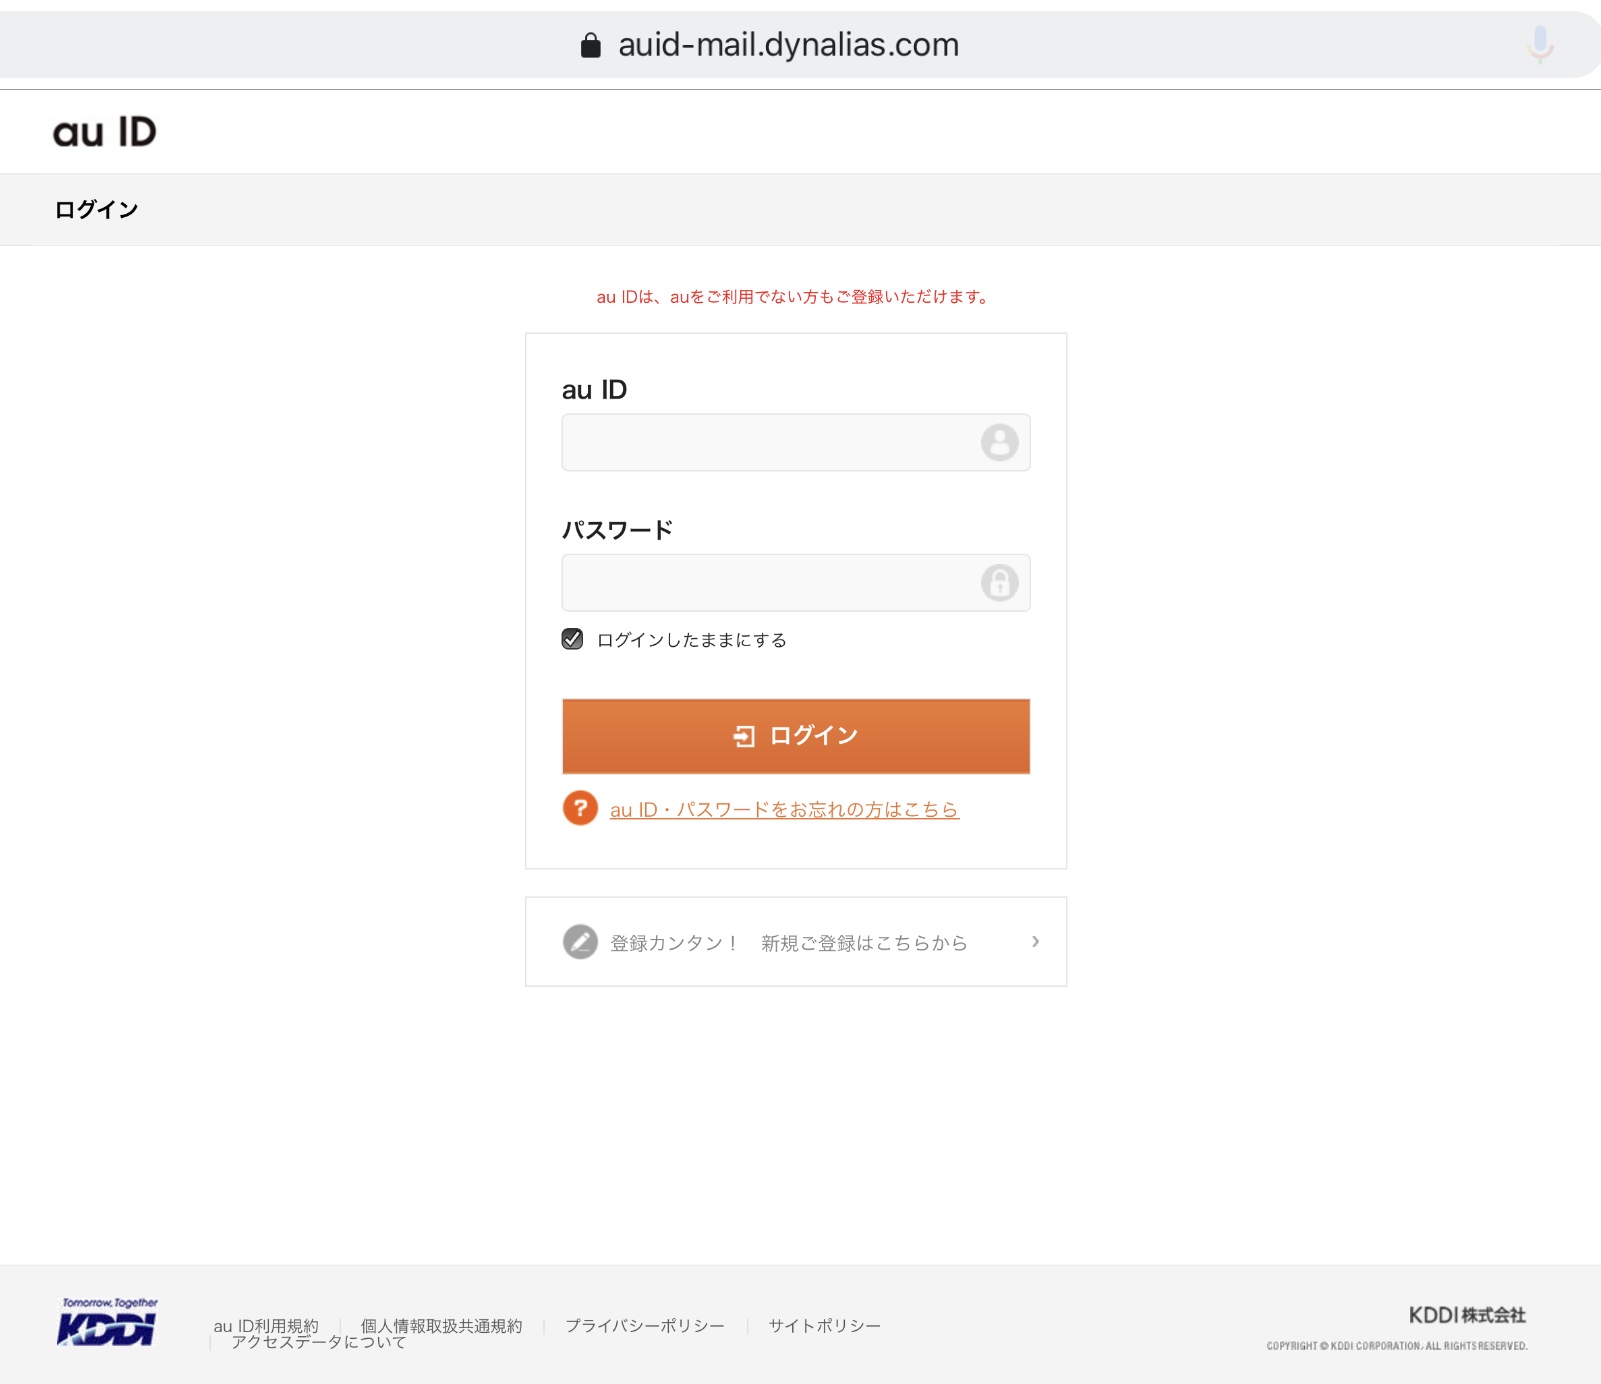 Kesagatame Au Kddi のフィッシングサイト情報です Hxxps Redirecting Is Not Certified Com Redirecting Alpha Id Ssn Id Point Alpha Login Id Au Php Redirect Hxxps Auid Mail Dynalias Com Mail Signin Login App Secure Au Id Auid